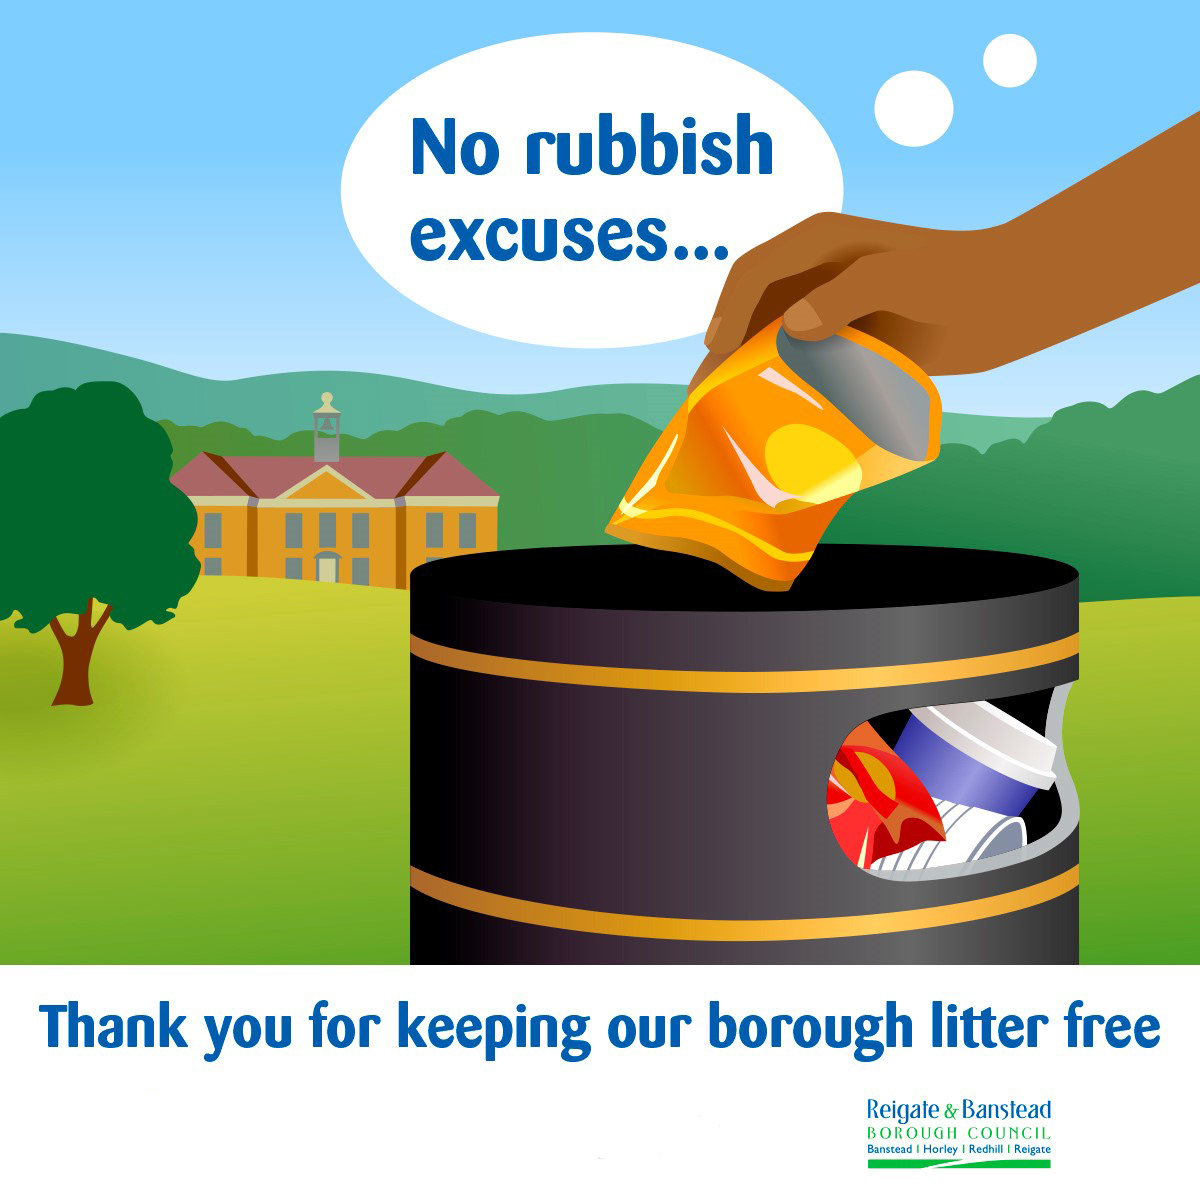 If you enjoy our parks and countryside today, leave them looking clean and green for others to enjoy too! 
Remember: Don’t leave litter behind. 
Thank you 👍 
#NoRubbishExcuses